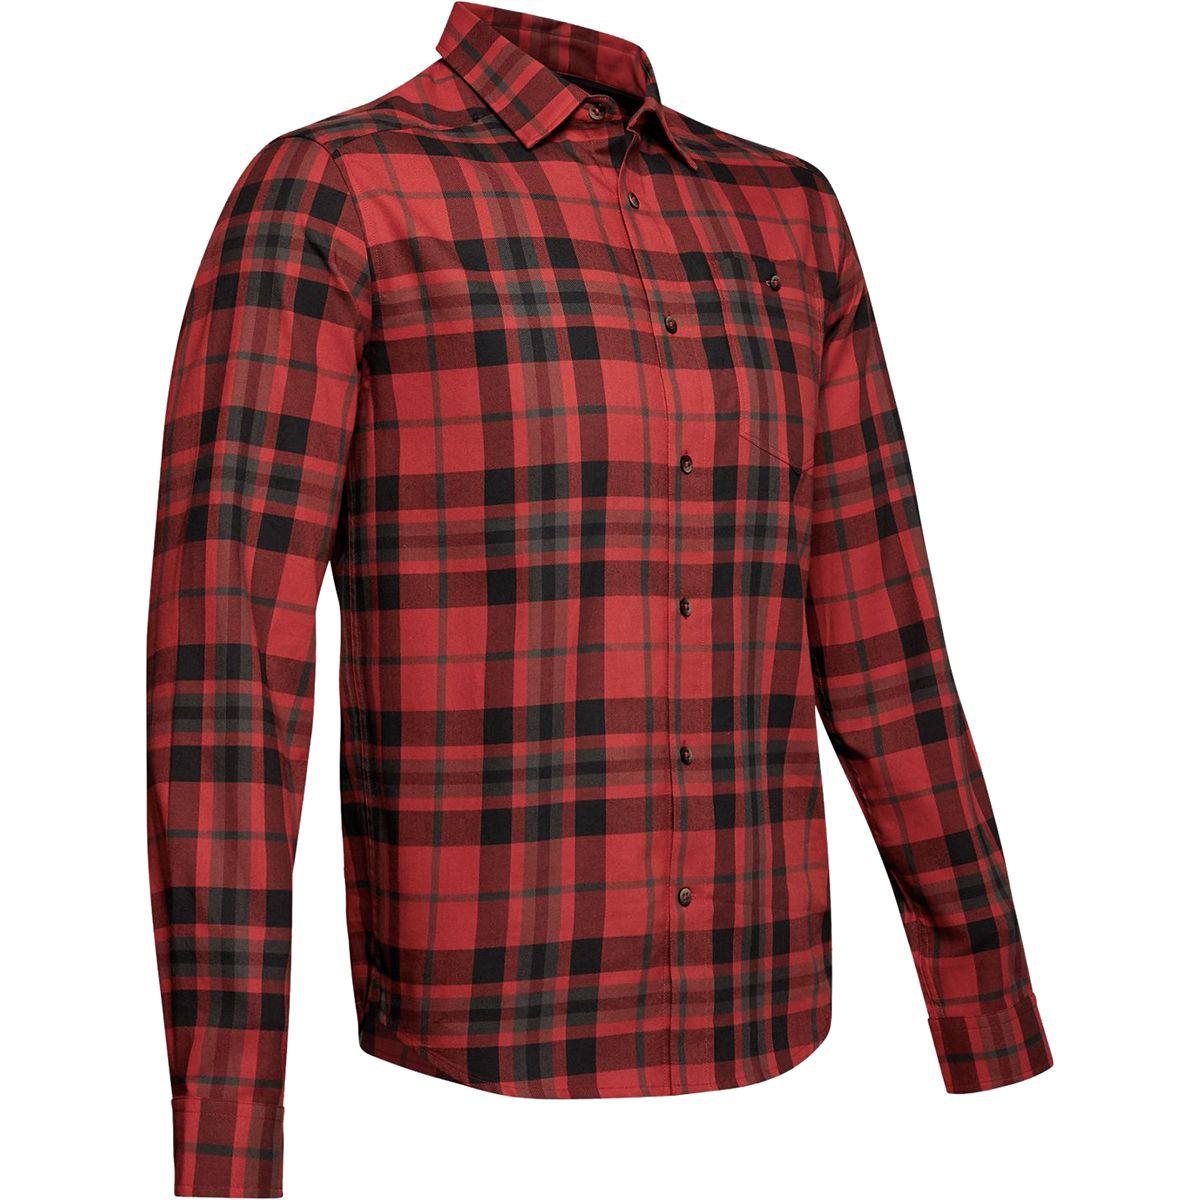 Under Armour Tradesman 2.0 Flannel Shirt in Red for Men - Lyst